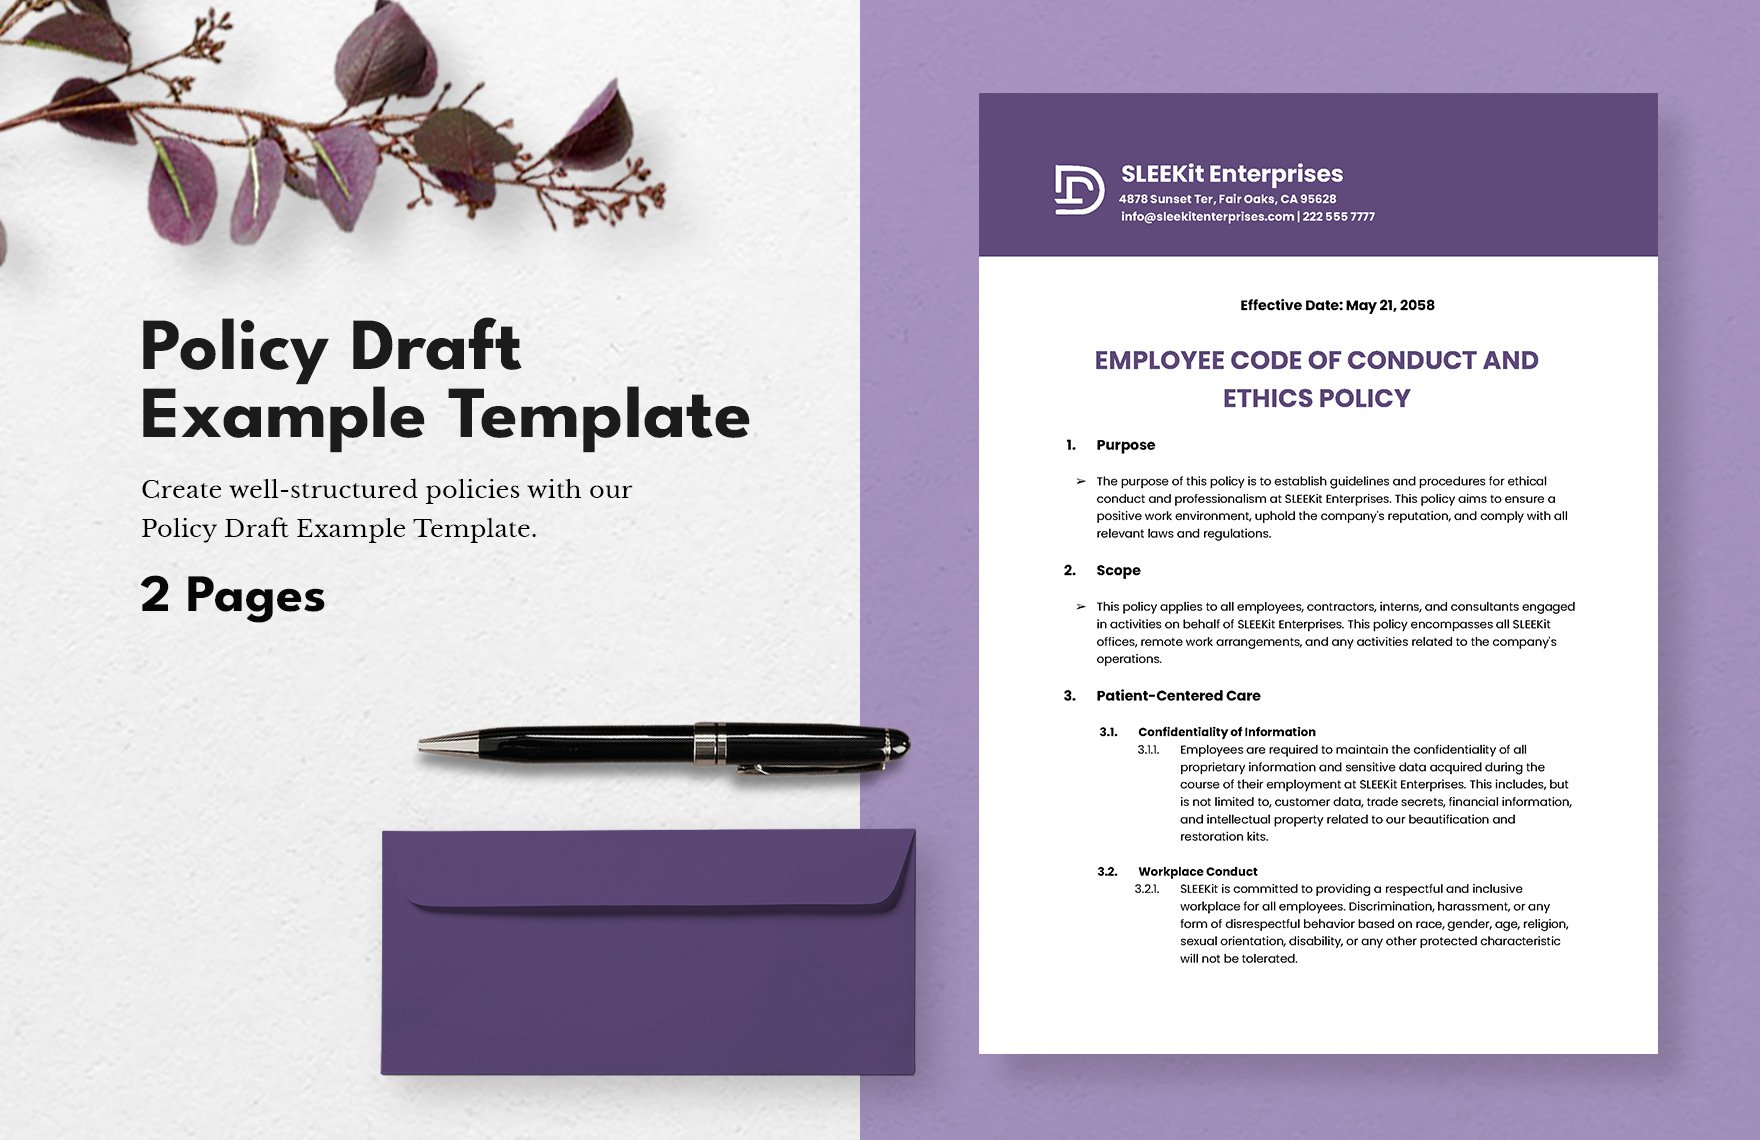 Policy Draft Example Template